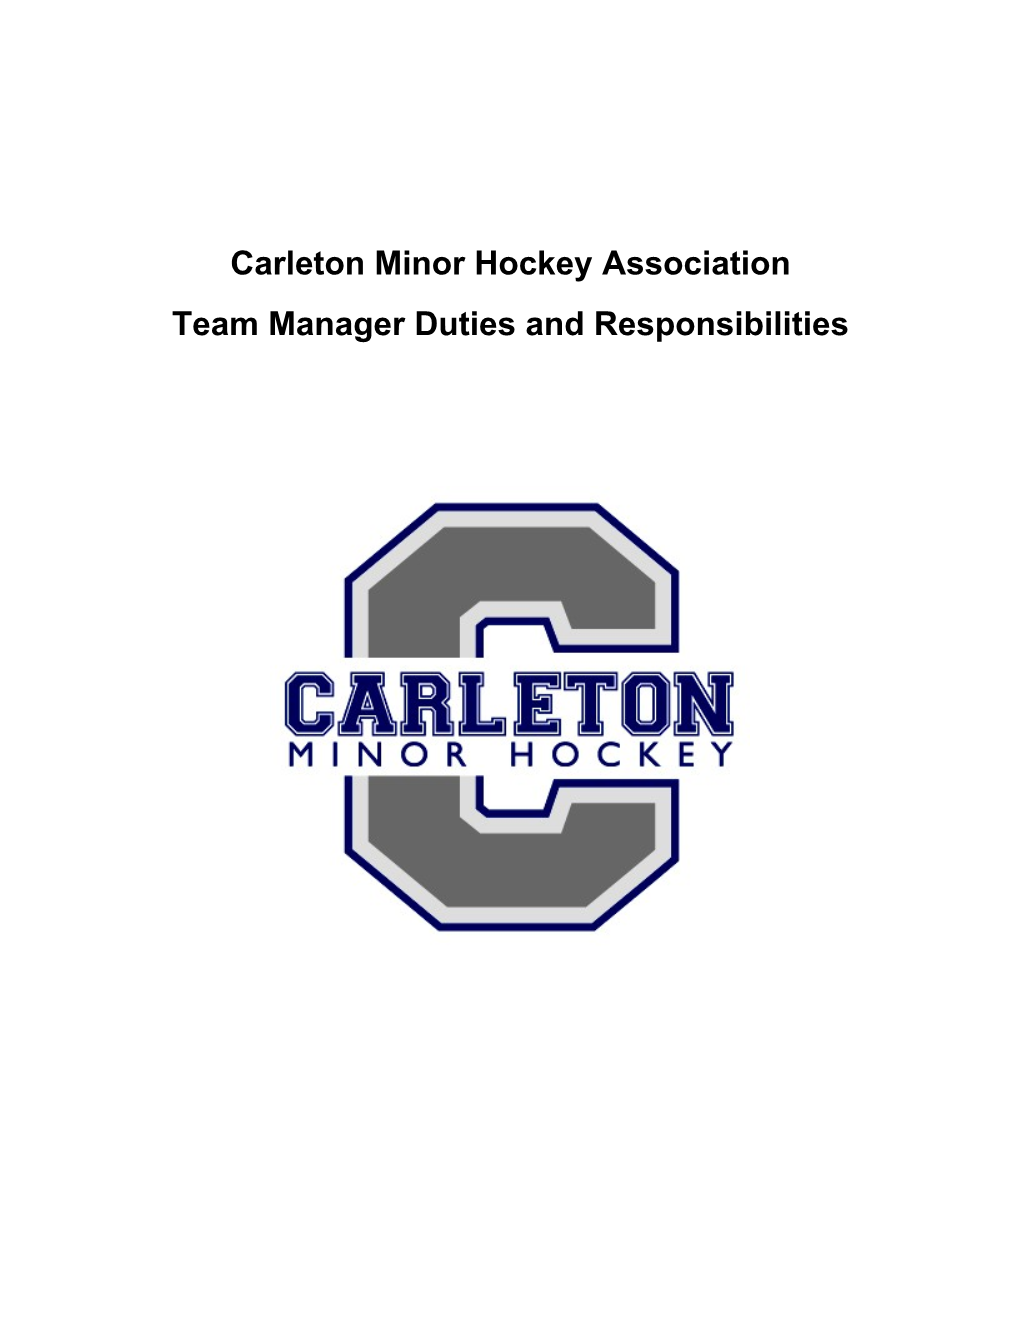 Team Manager Roles and Responsibilities